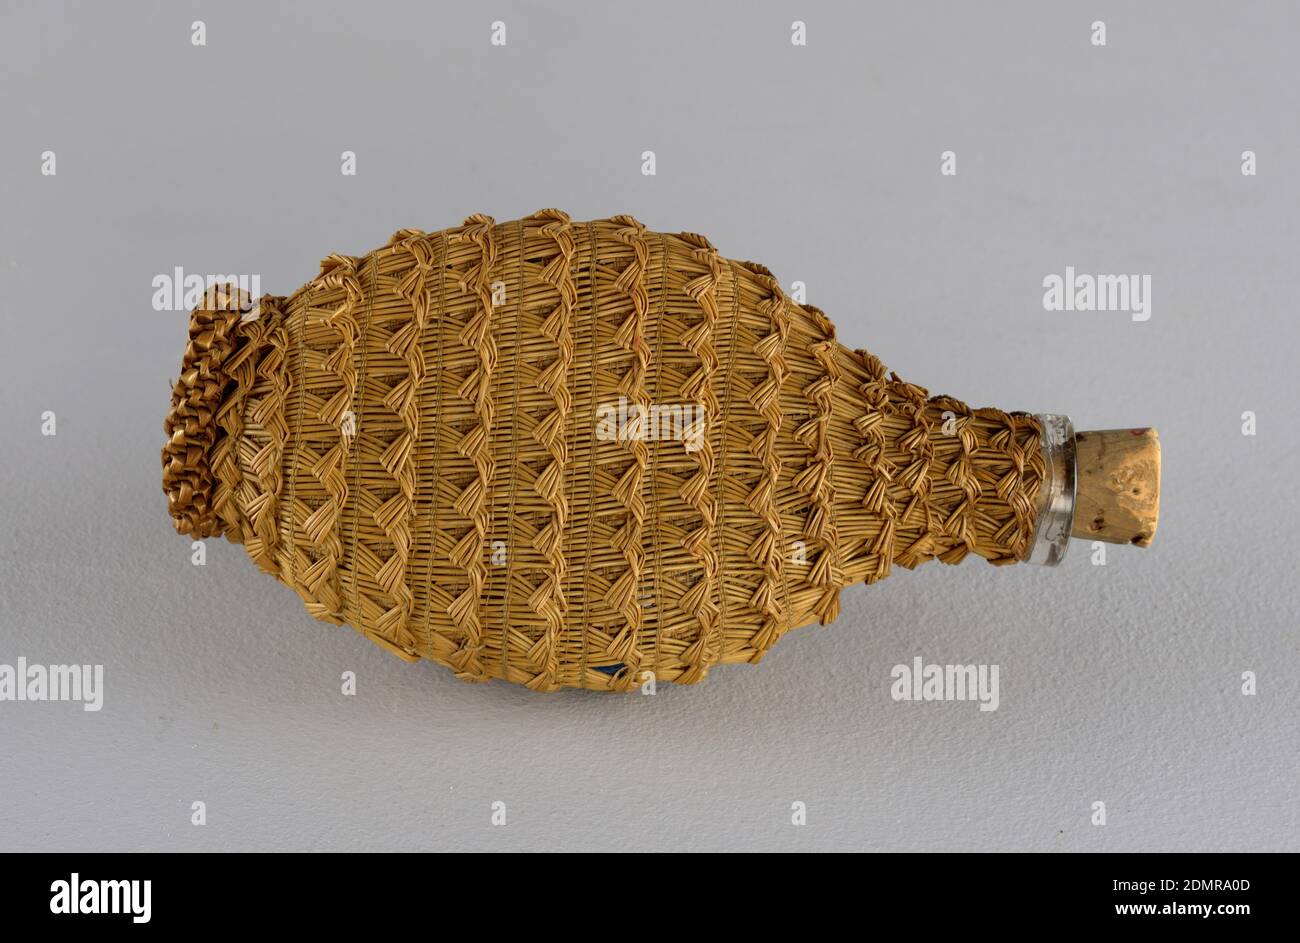 https://c8.alamy.com/comp/2DMRA0D/flask-and-stopper-glass-straw-cork-flat-oval-glass-flask-covered-in-woven-straw-conical-cork-stopper-possibly-asia-late-19th-century-containers-decorative-arts-flask-and-stopper-2DMRA0D.jpg